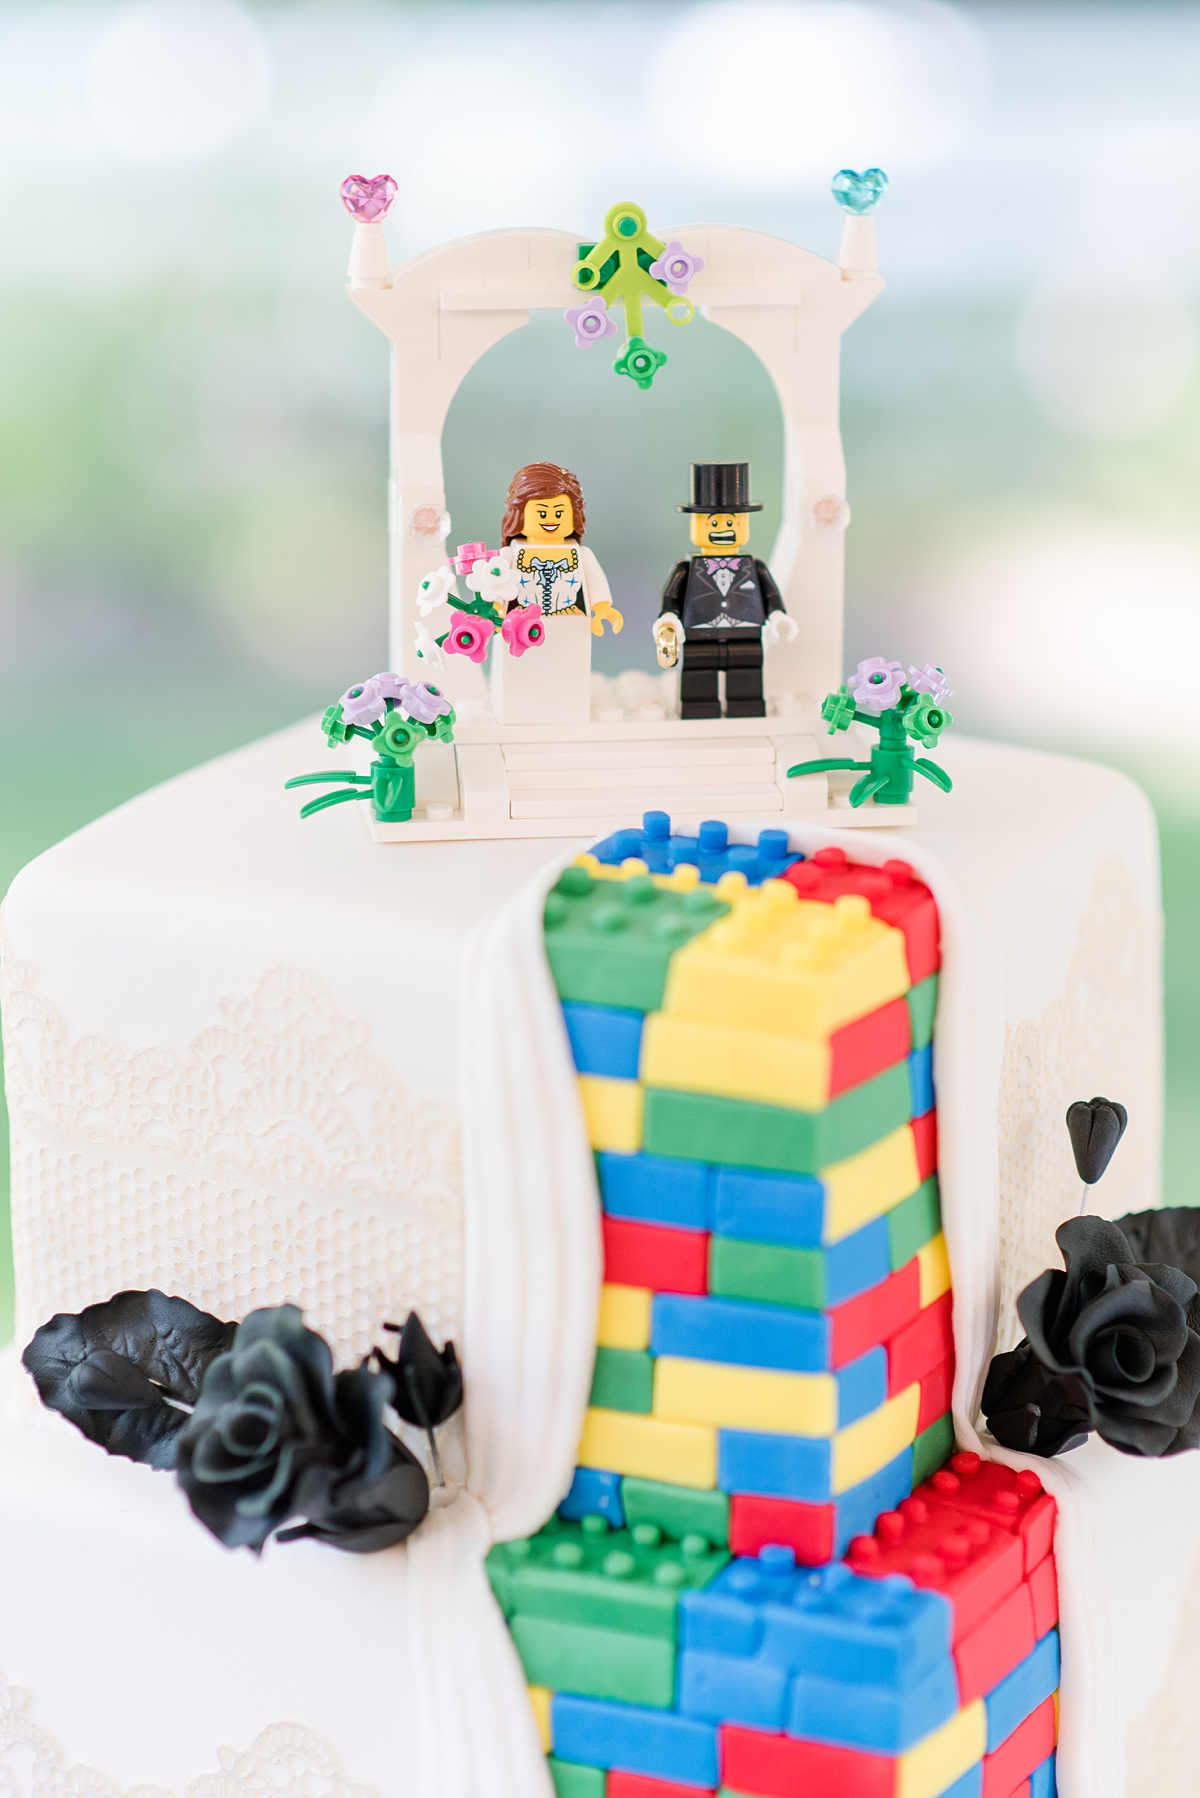 Unique Lego Wedding Cake and Lego People Cake Toppers at Virginia Cliffe Inn Summer Wedding Reception. Wedding Photography by Virginia Wedding Photographer Kailey Brianne Photography. 